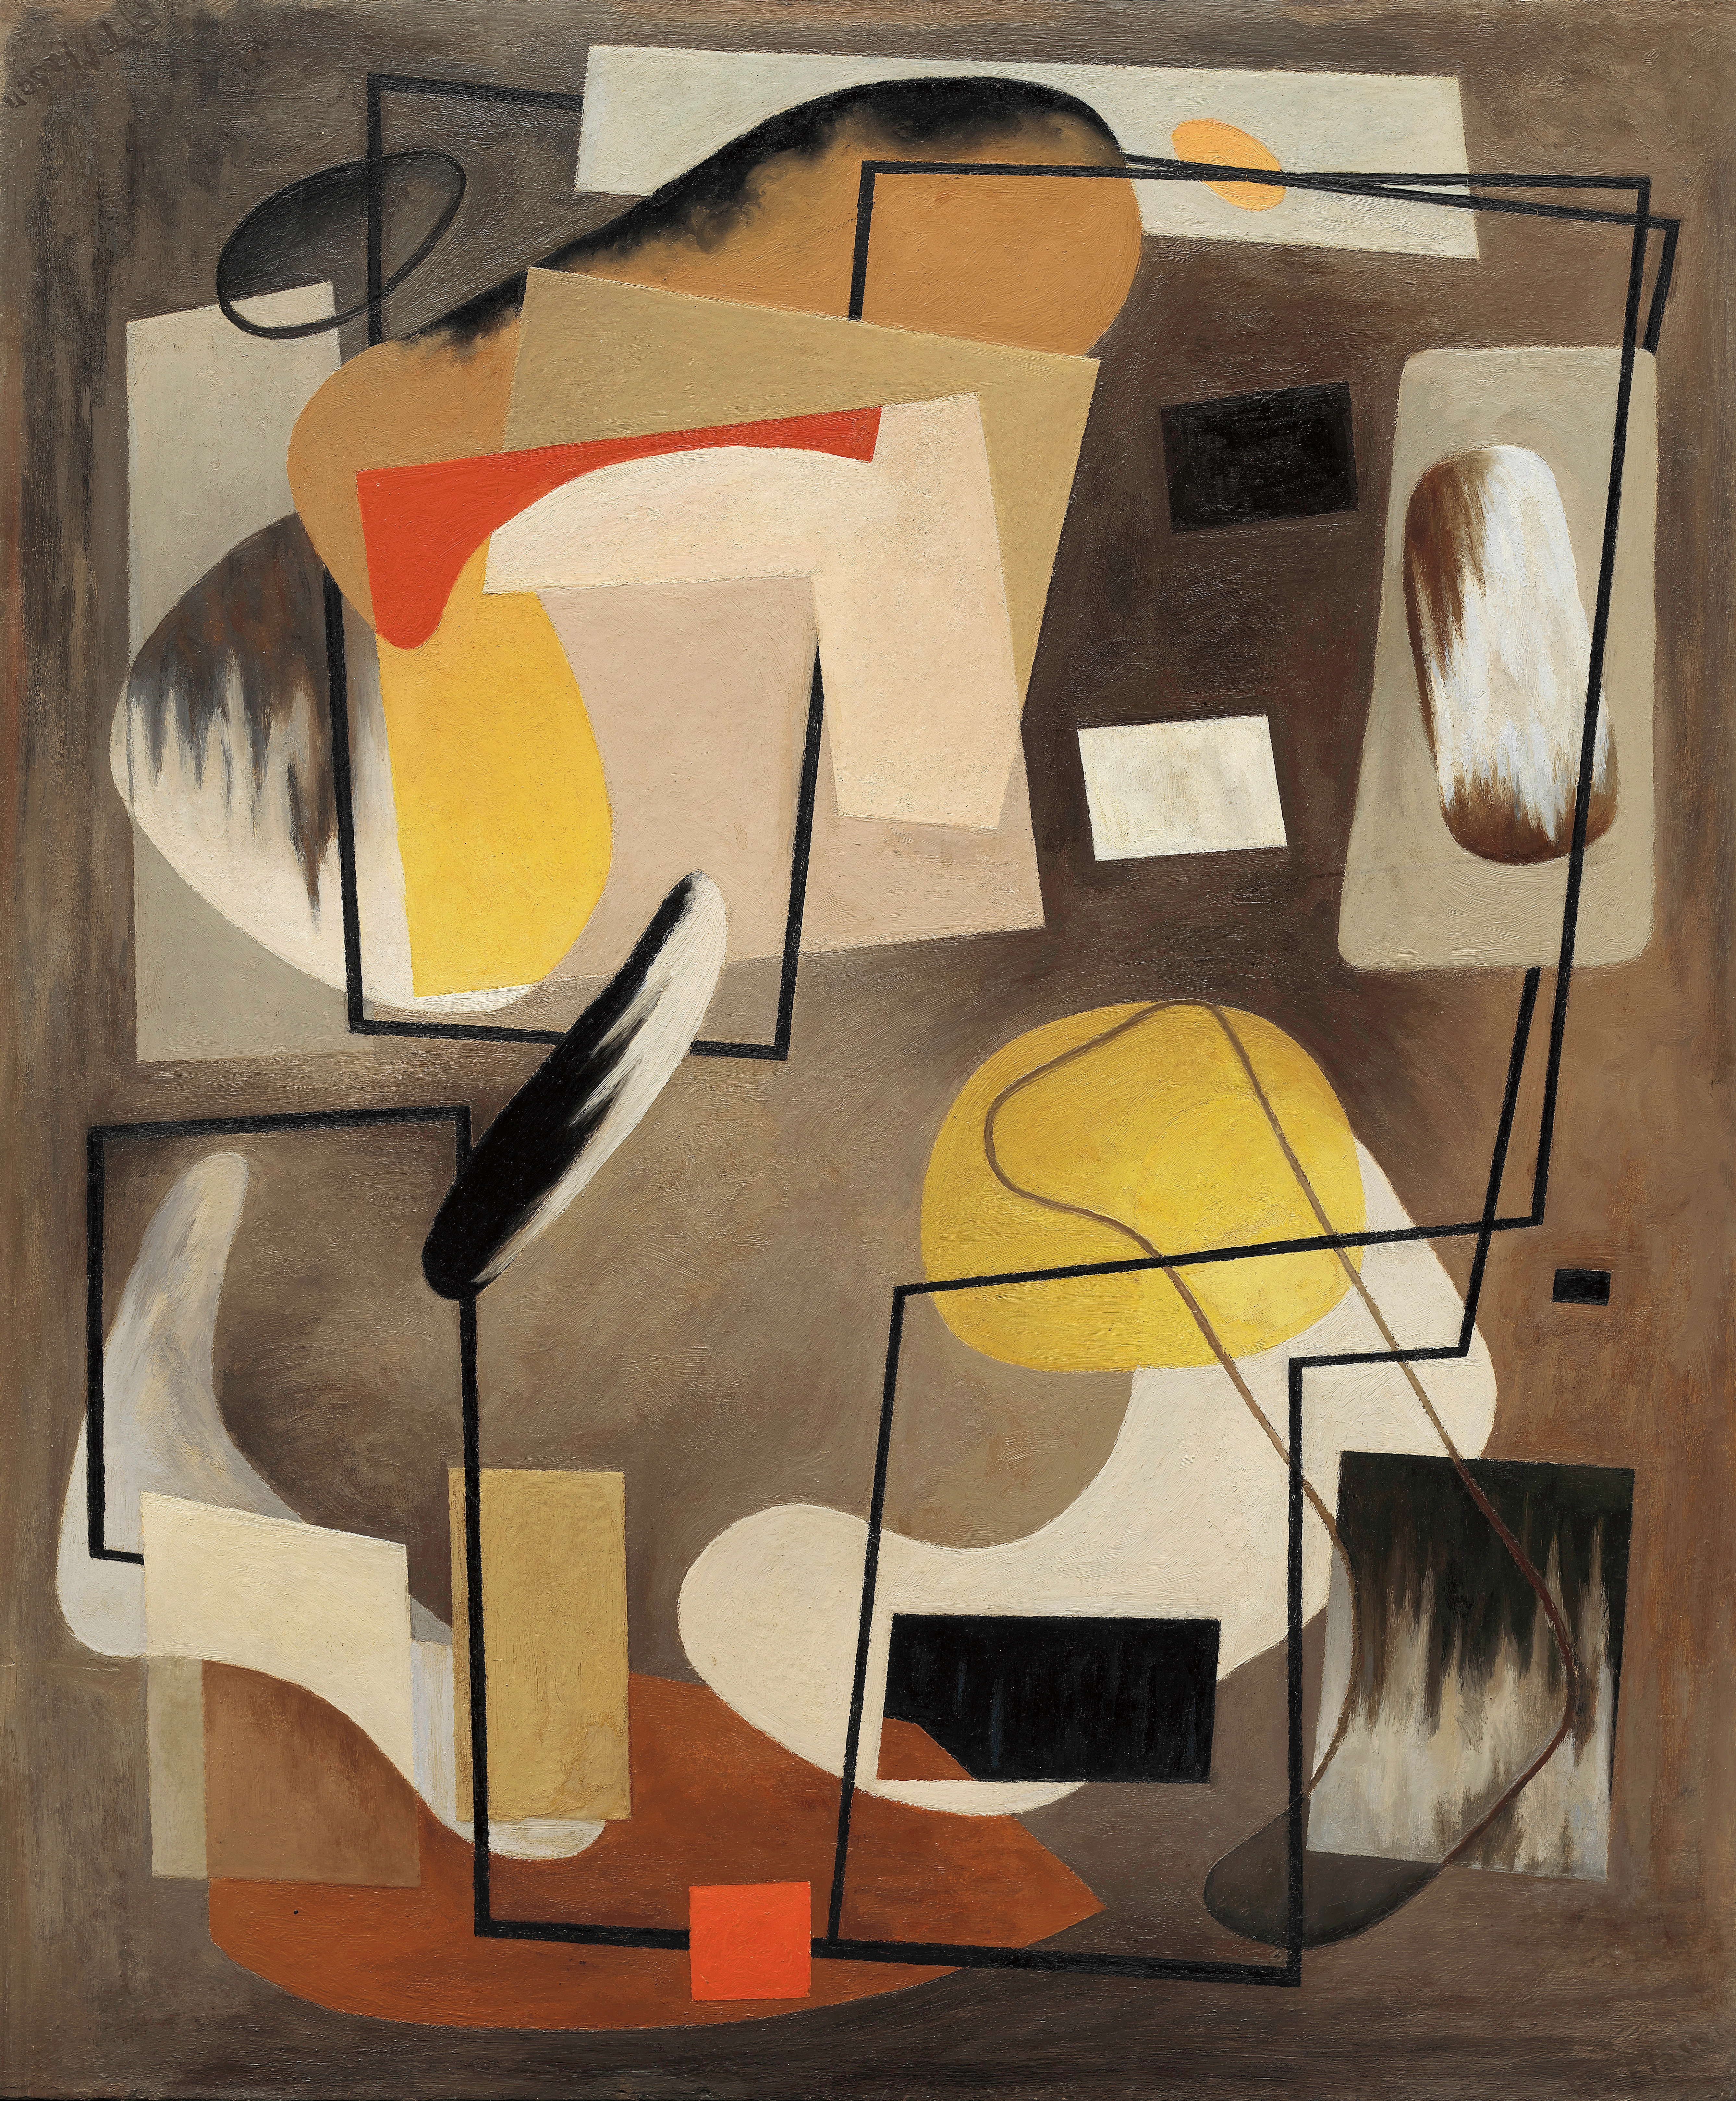 Abstract oil on canvas painting, comprised of biomorphic form and a black, geometric line drawn between the foreground and background. The dominant colors are browns, yellows, oranges, grey, black, and white.